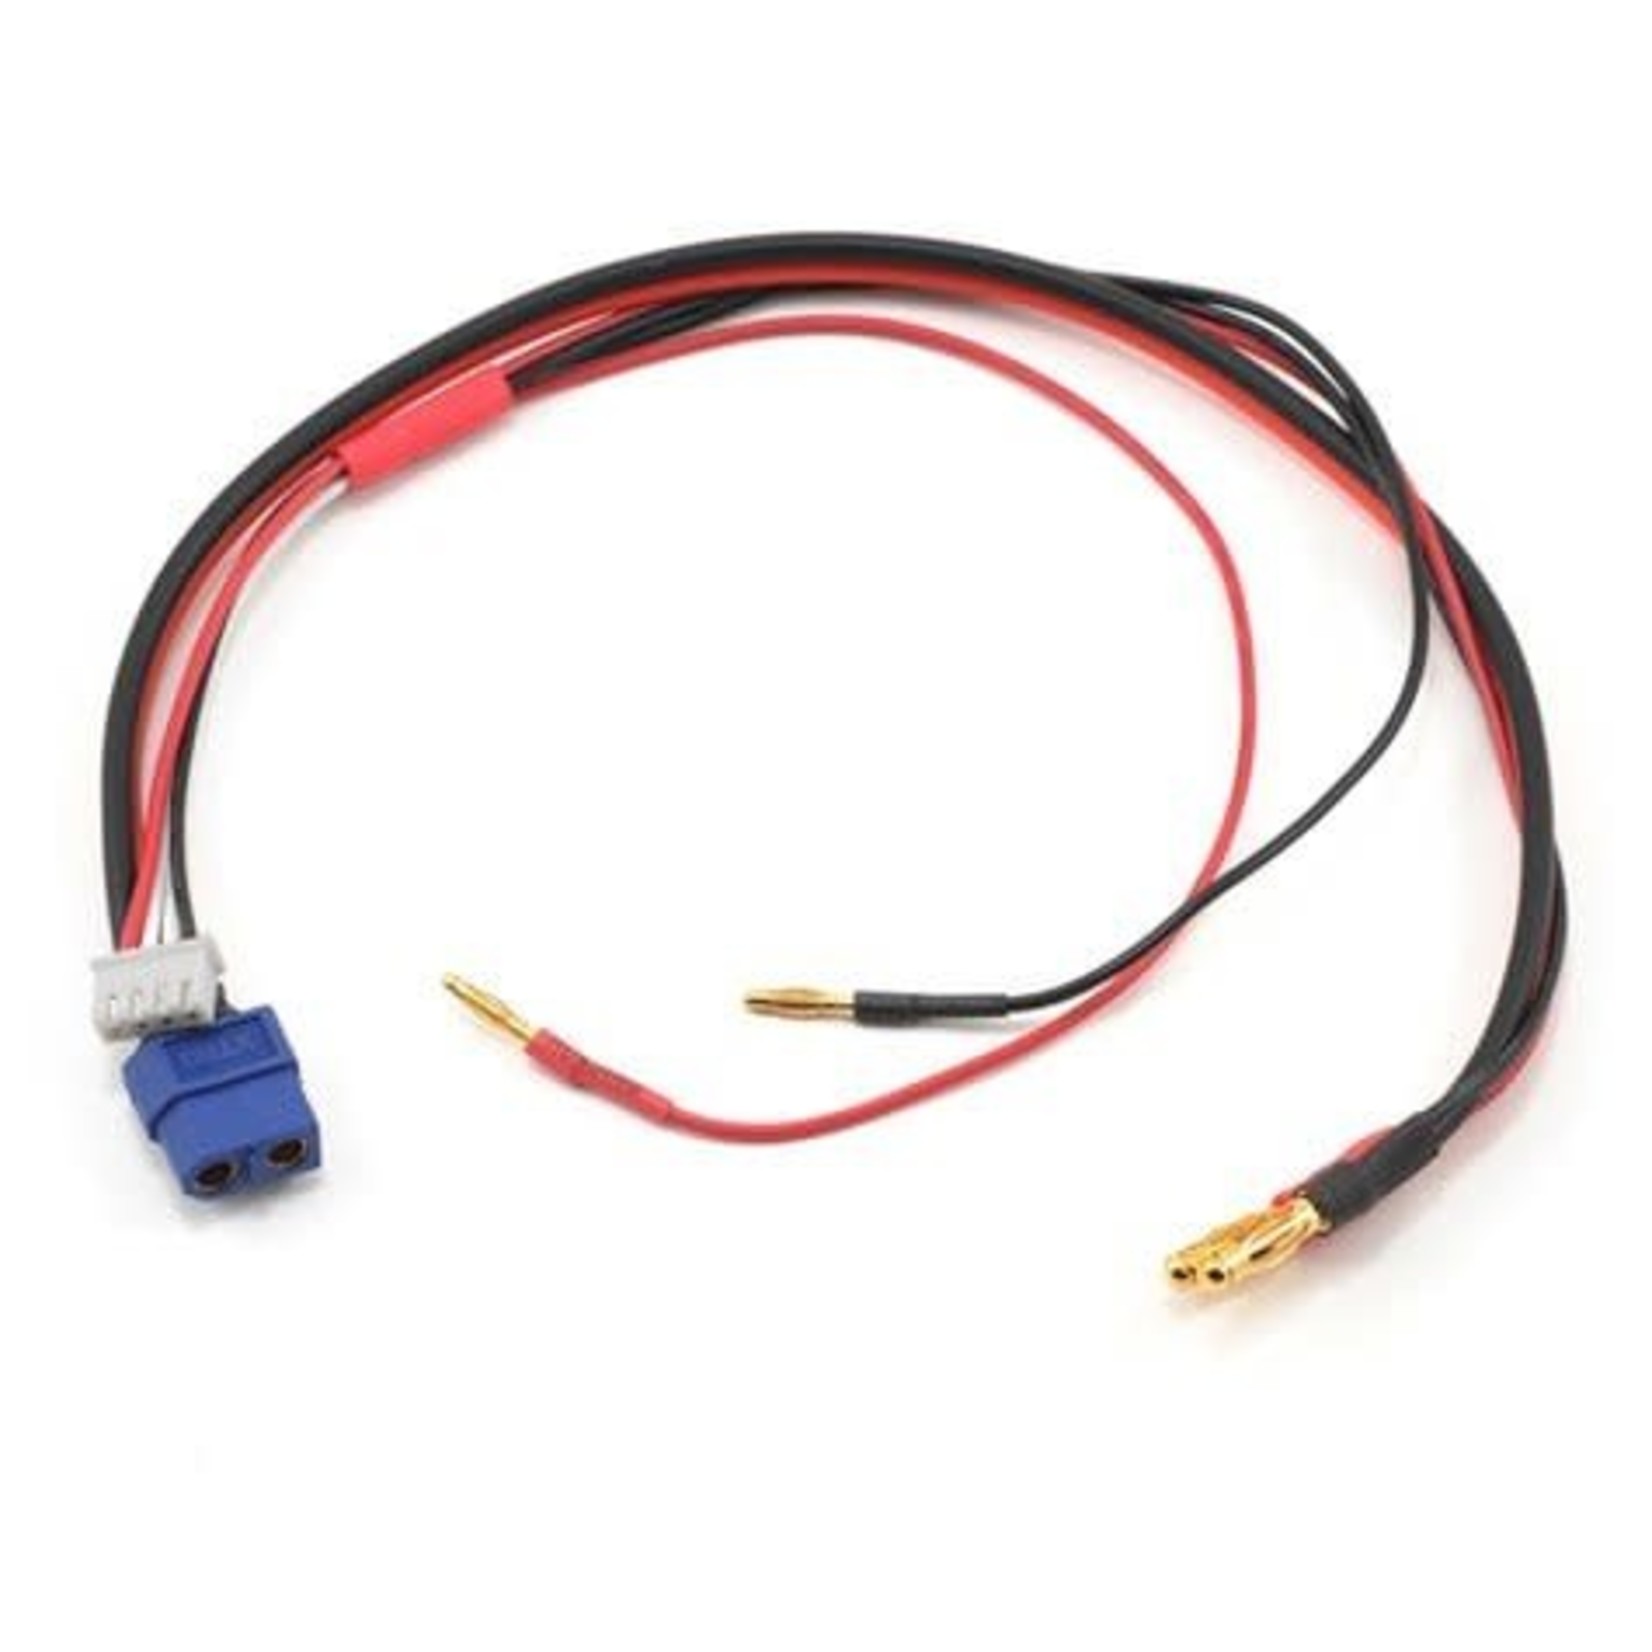 ProTek RC ProTek RC 3S Charge/Balance Adapter Cable